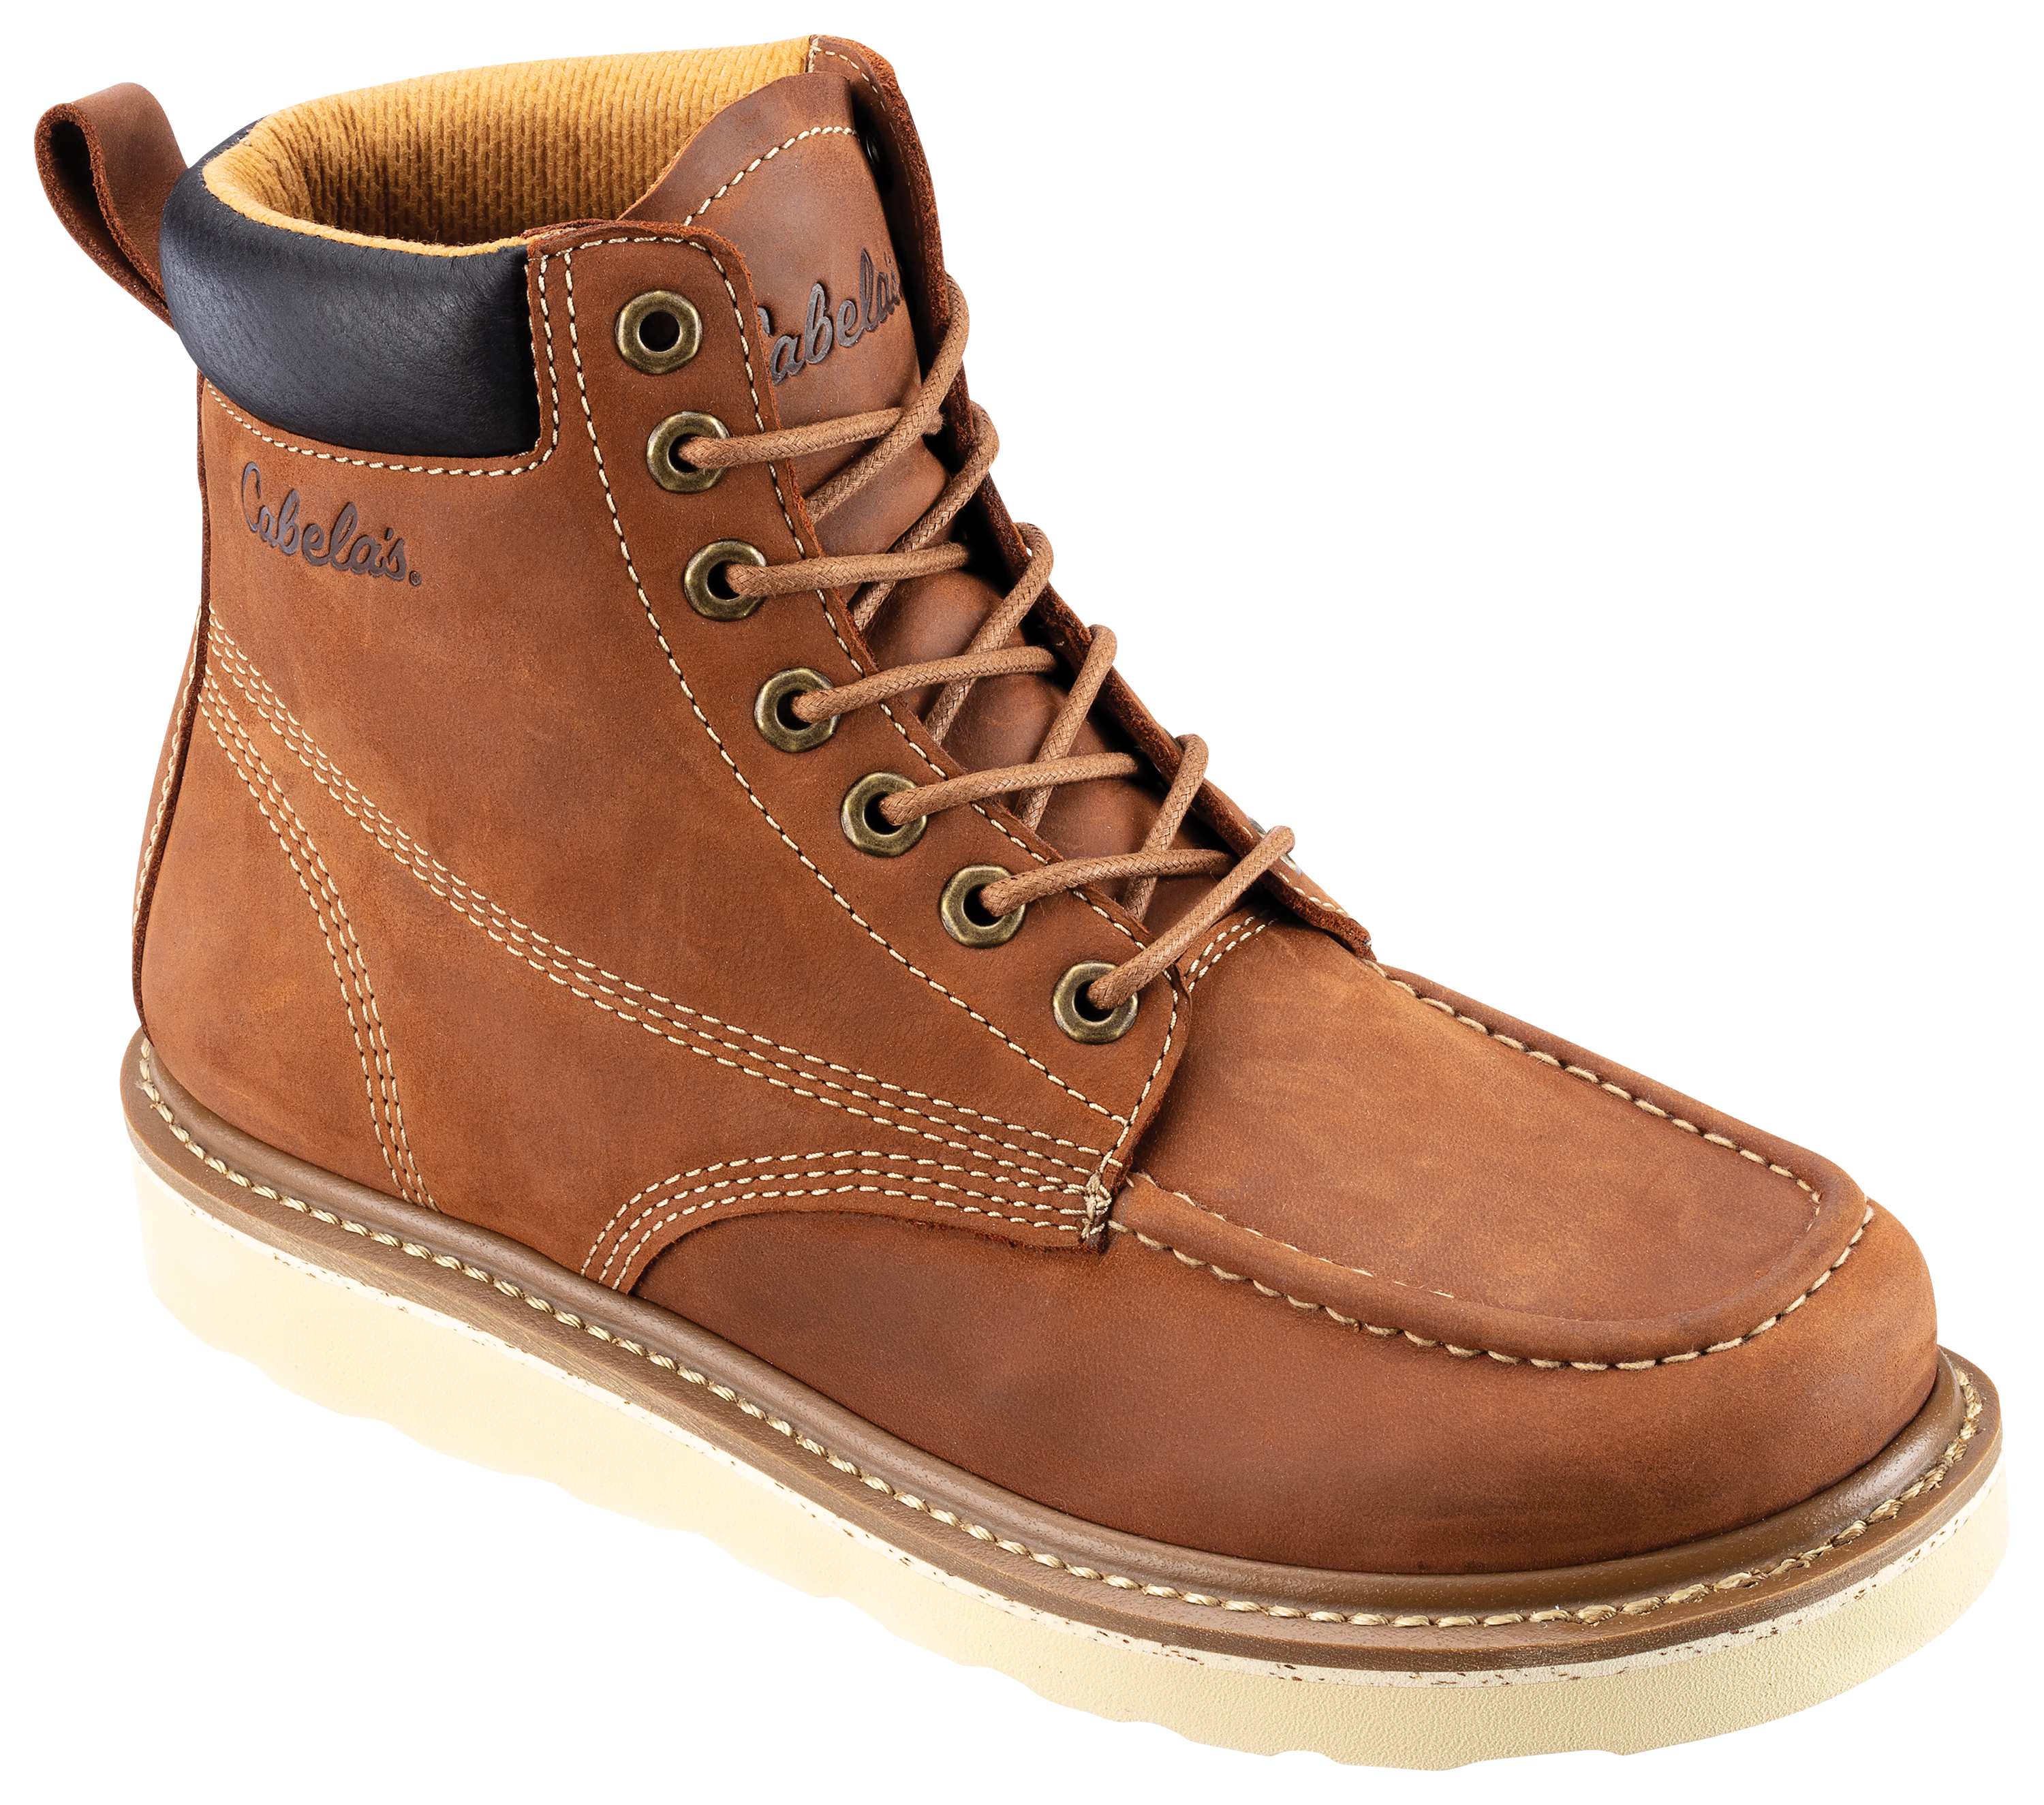 Cabela's Roughneck Wedge Work Boots for Men - Tan - 11M